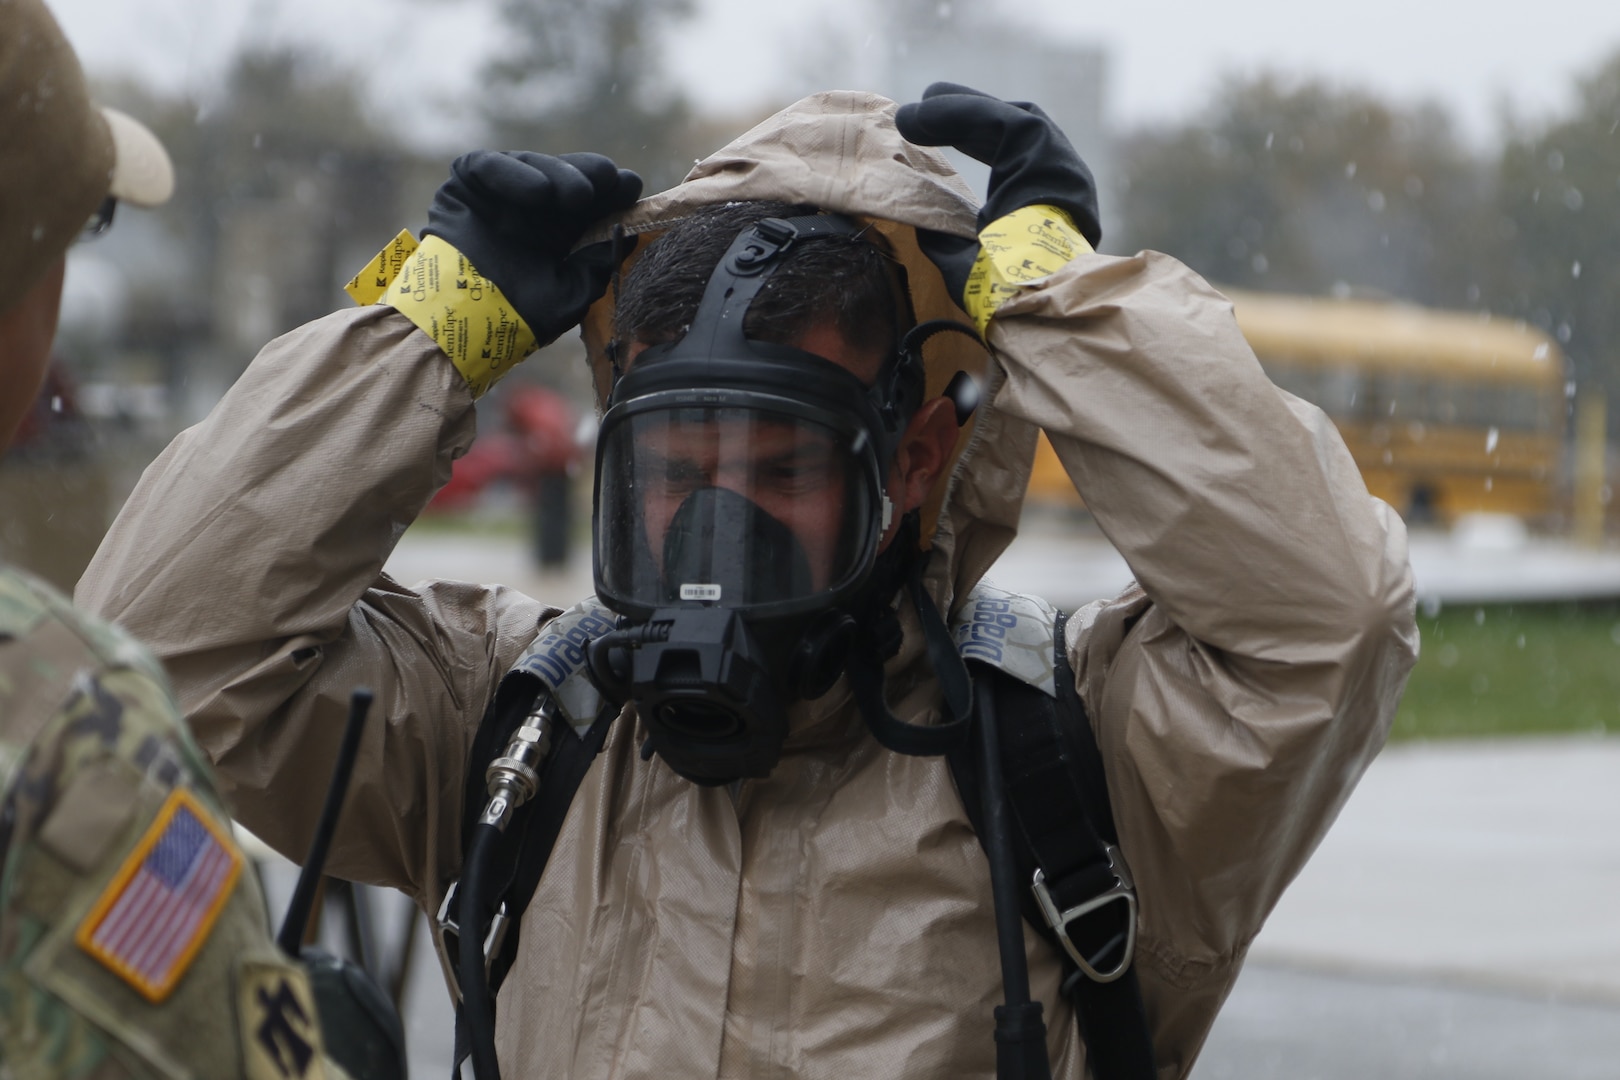 Photo: Staff Sgt. Corey Simmons, decontamination officer with the 63rd Civil Support Team, Oklahoma National Guard, dons a safety suit in preparation to decontaminate the survey team after they have completed their mission in the Boone County Fire Protection District, Columbia, Missouri, Oct. 26, 2020.

The 63rd Civil Support Team conducted a four-day joint training exercise to evaluate their response in supporting civil authorities at a domestic Chemical, Biological, Radiological, Nuclear, and High Yield Explosive (CBRNE) incident site. CBRNE agents advise on response measures and assist with appropriate requests for additional support. (Oklahoma Army National Guard Photo by Spc. Caleb Stone)